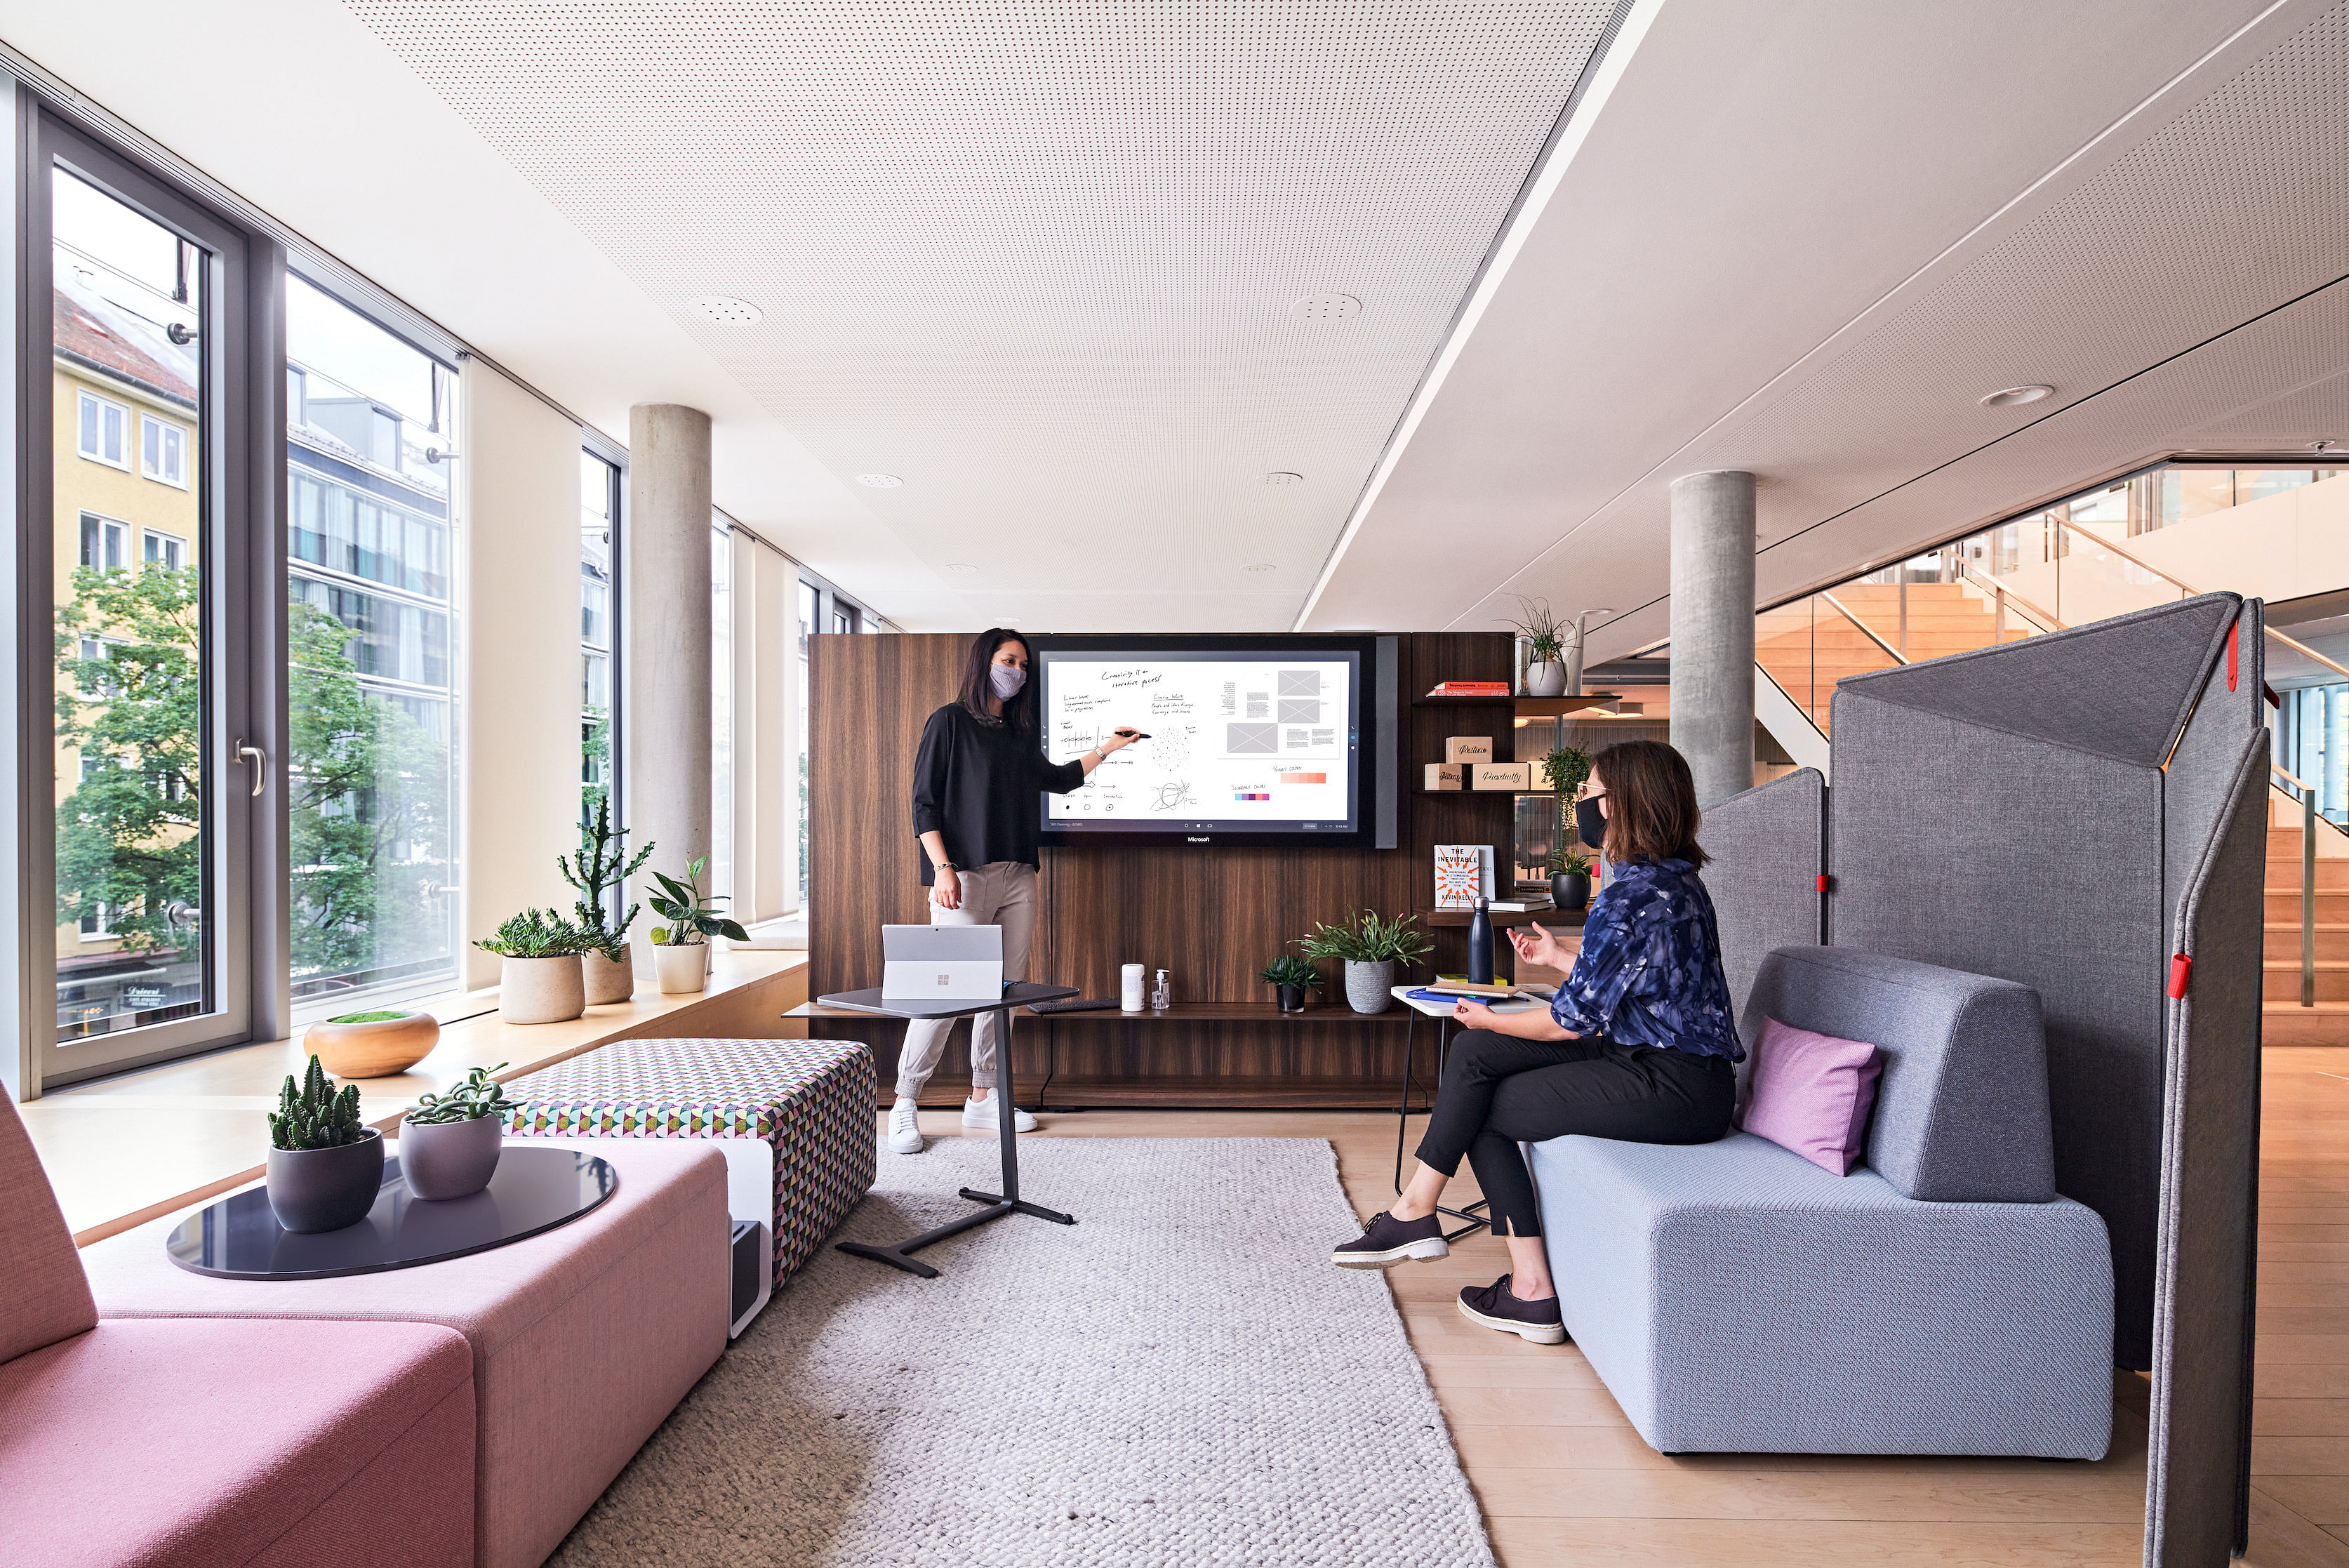 steelcase, collaboration spaces, office space